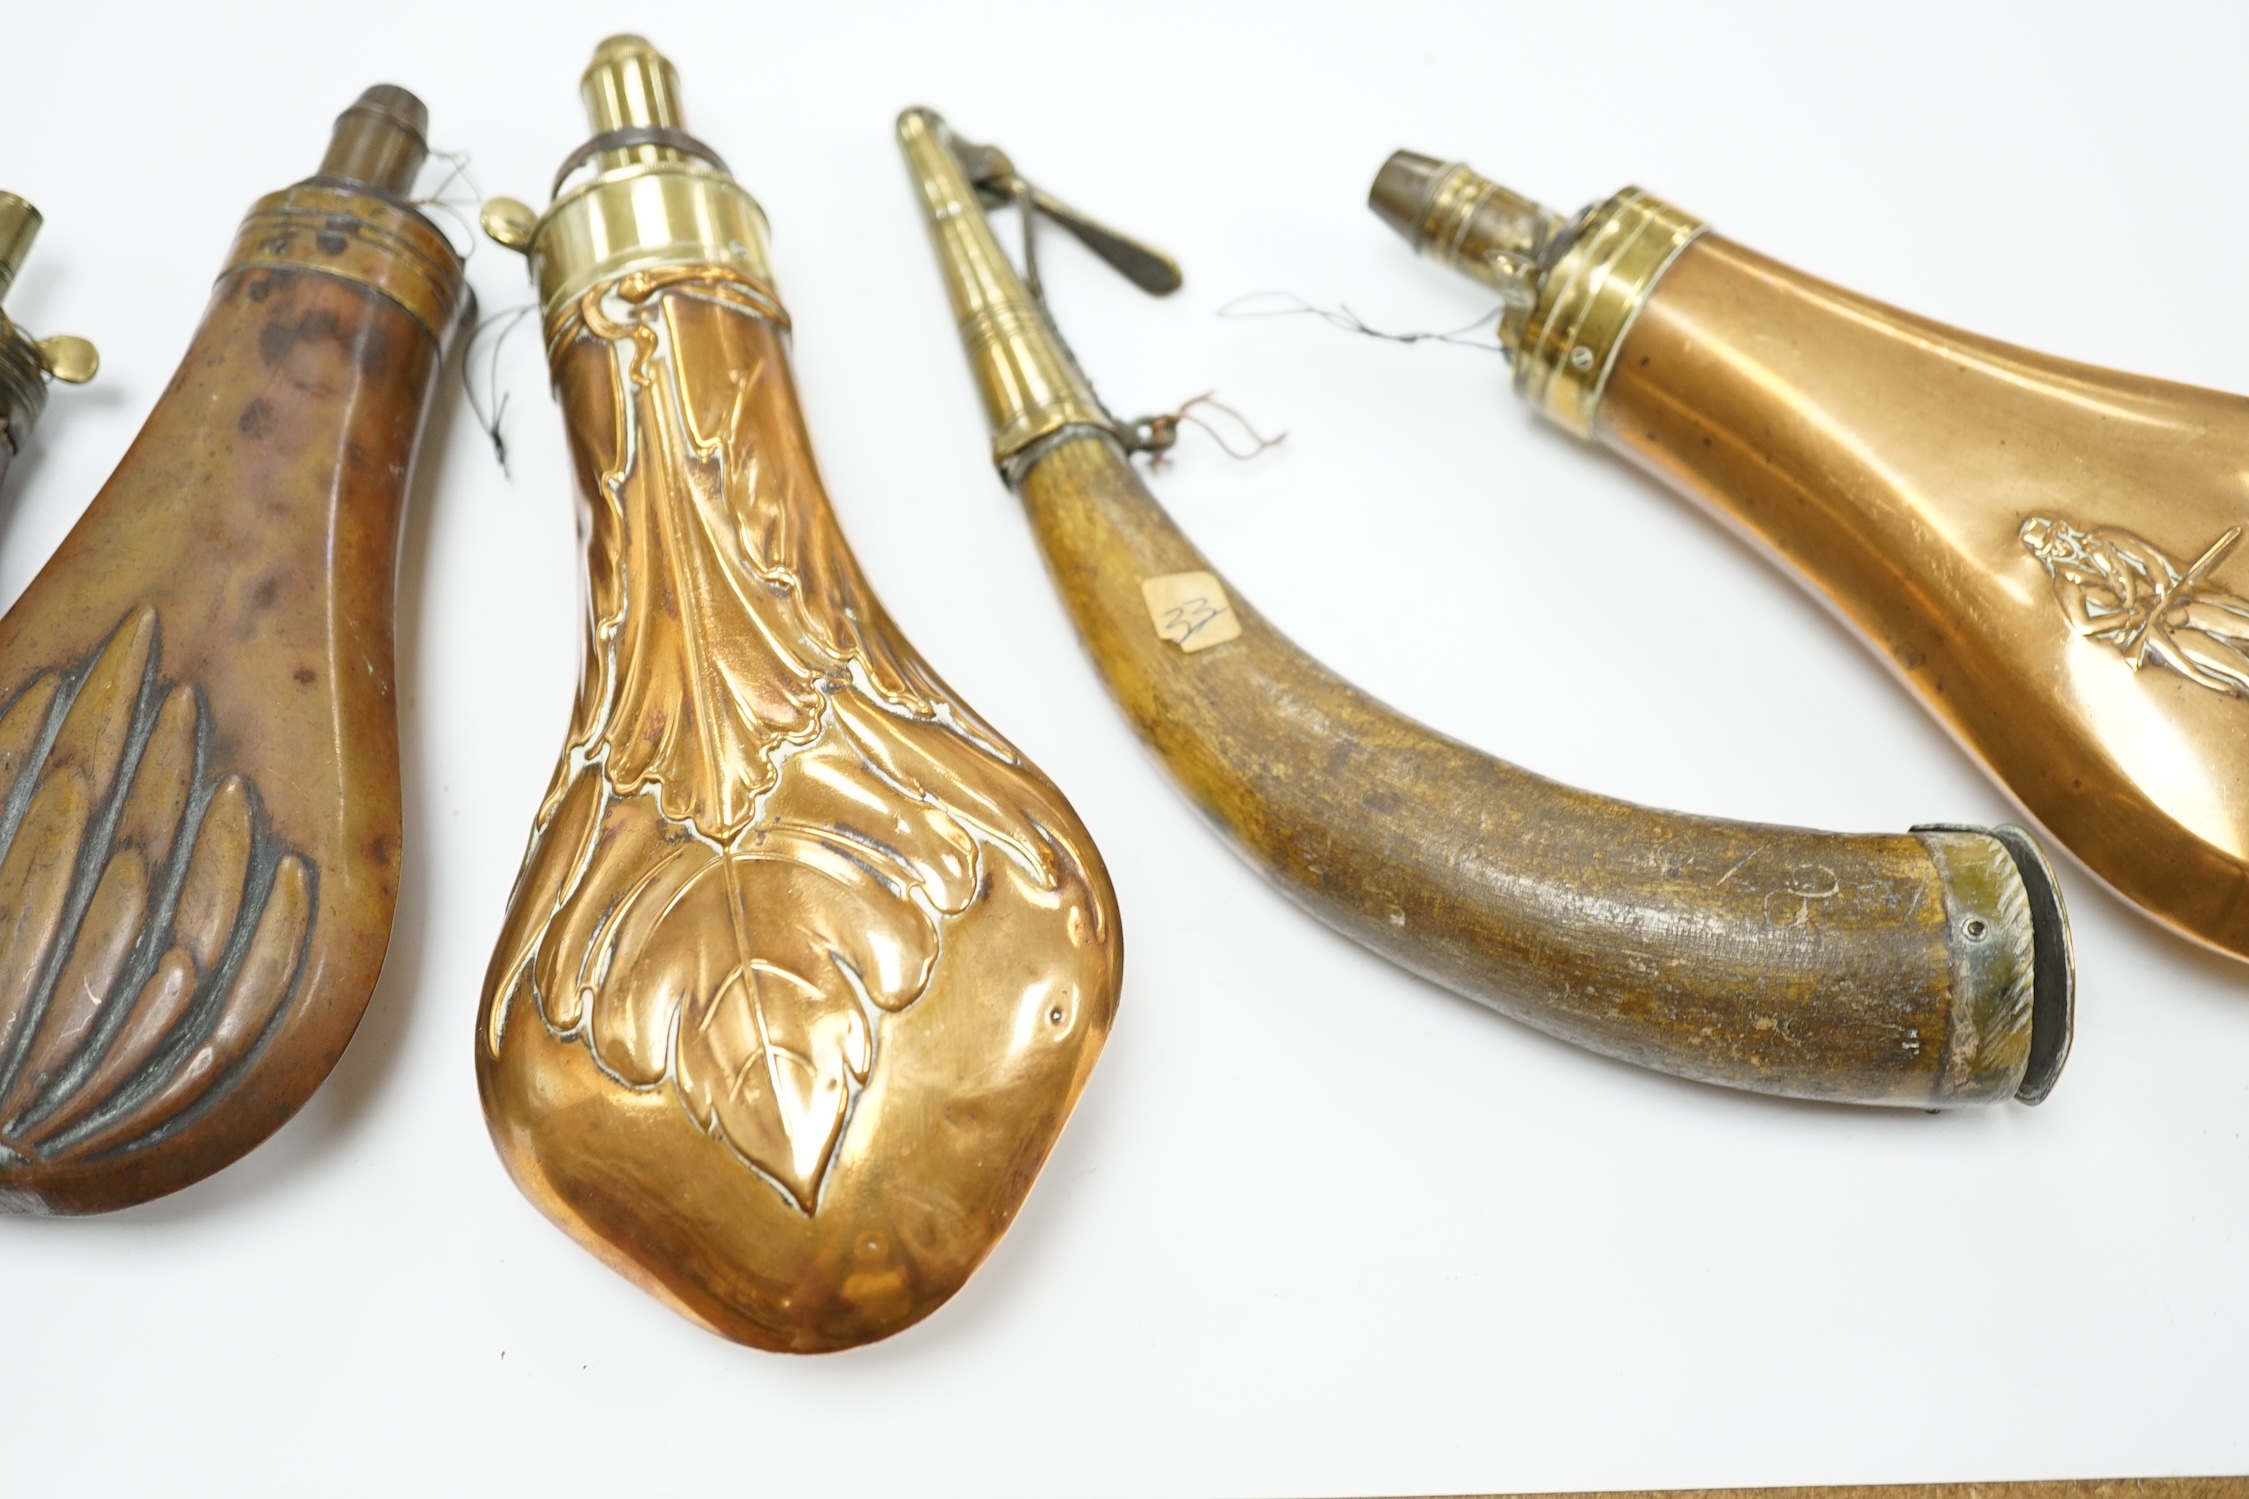 Five 19th century powder flasks; three copper and brass flasks, two with embossed decoration to the bodies, a leather covered flask and a horn Royal Artillery priming horn. Condition - poor to fair